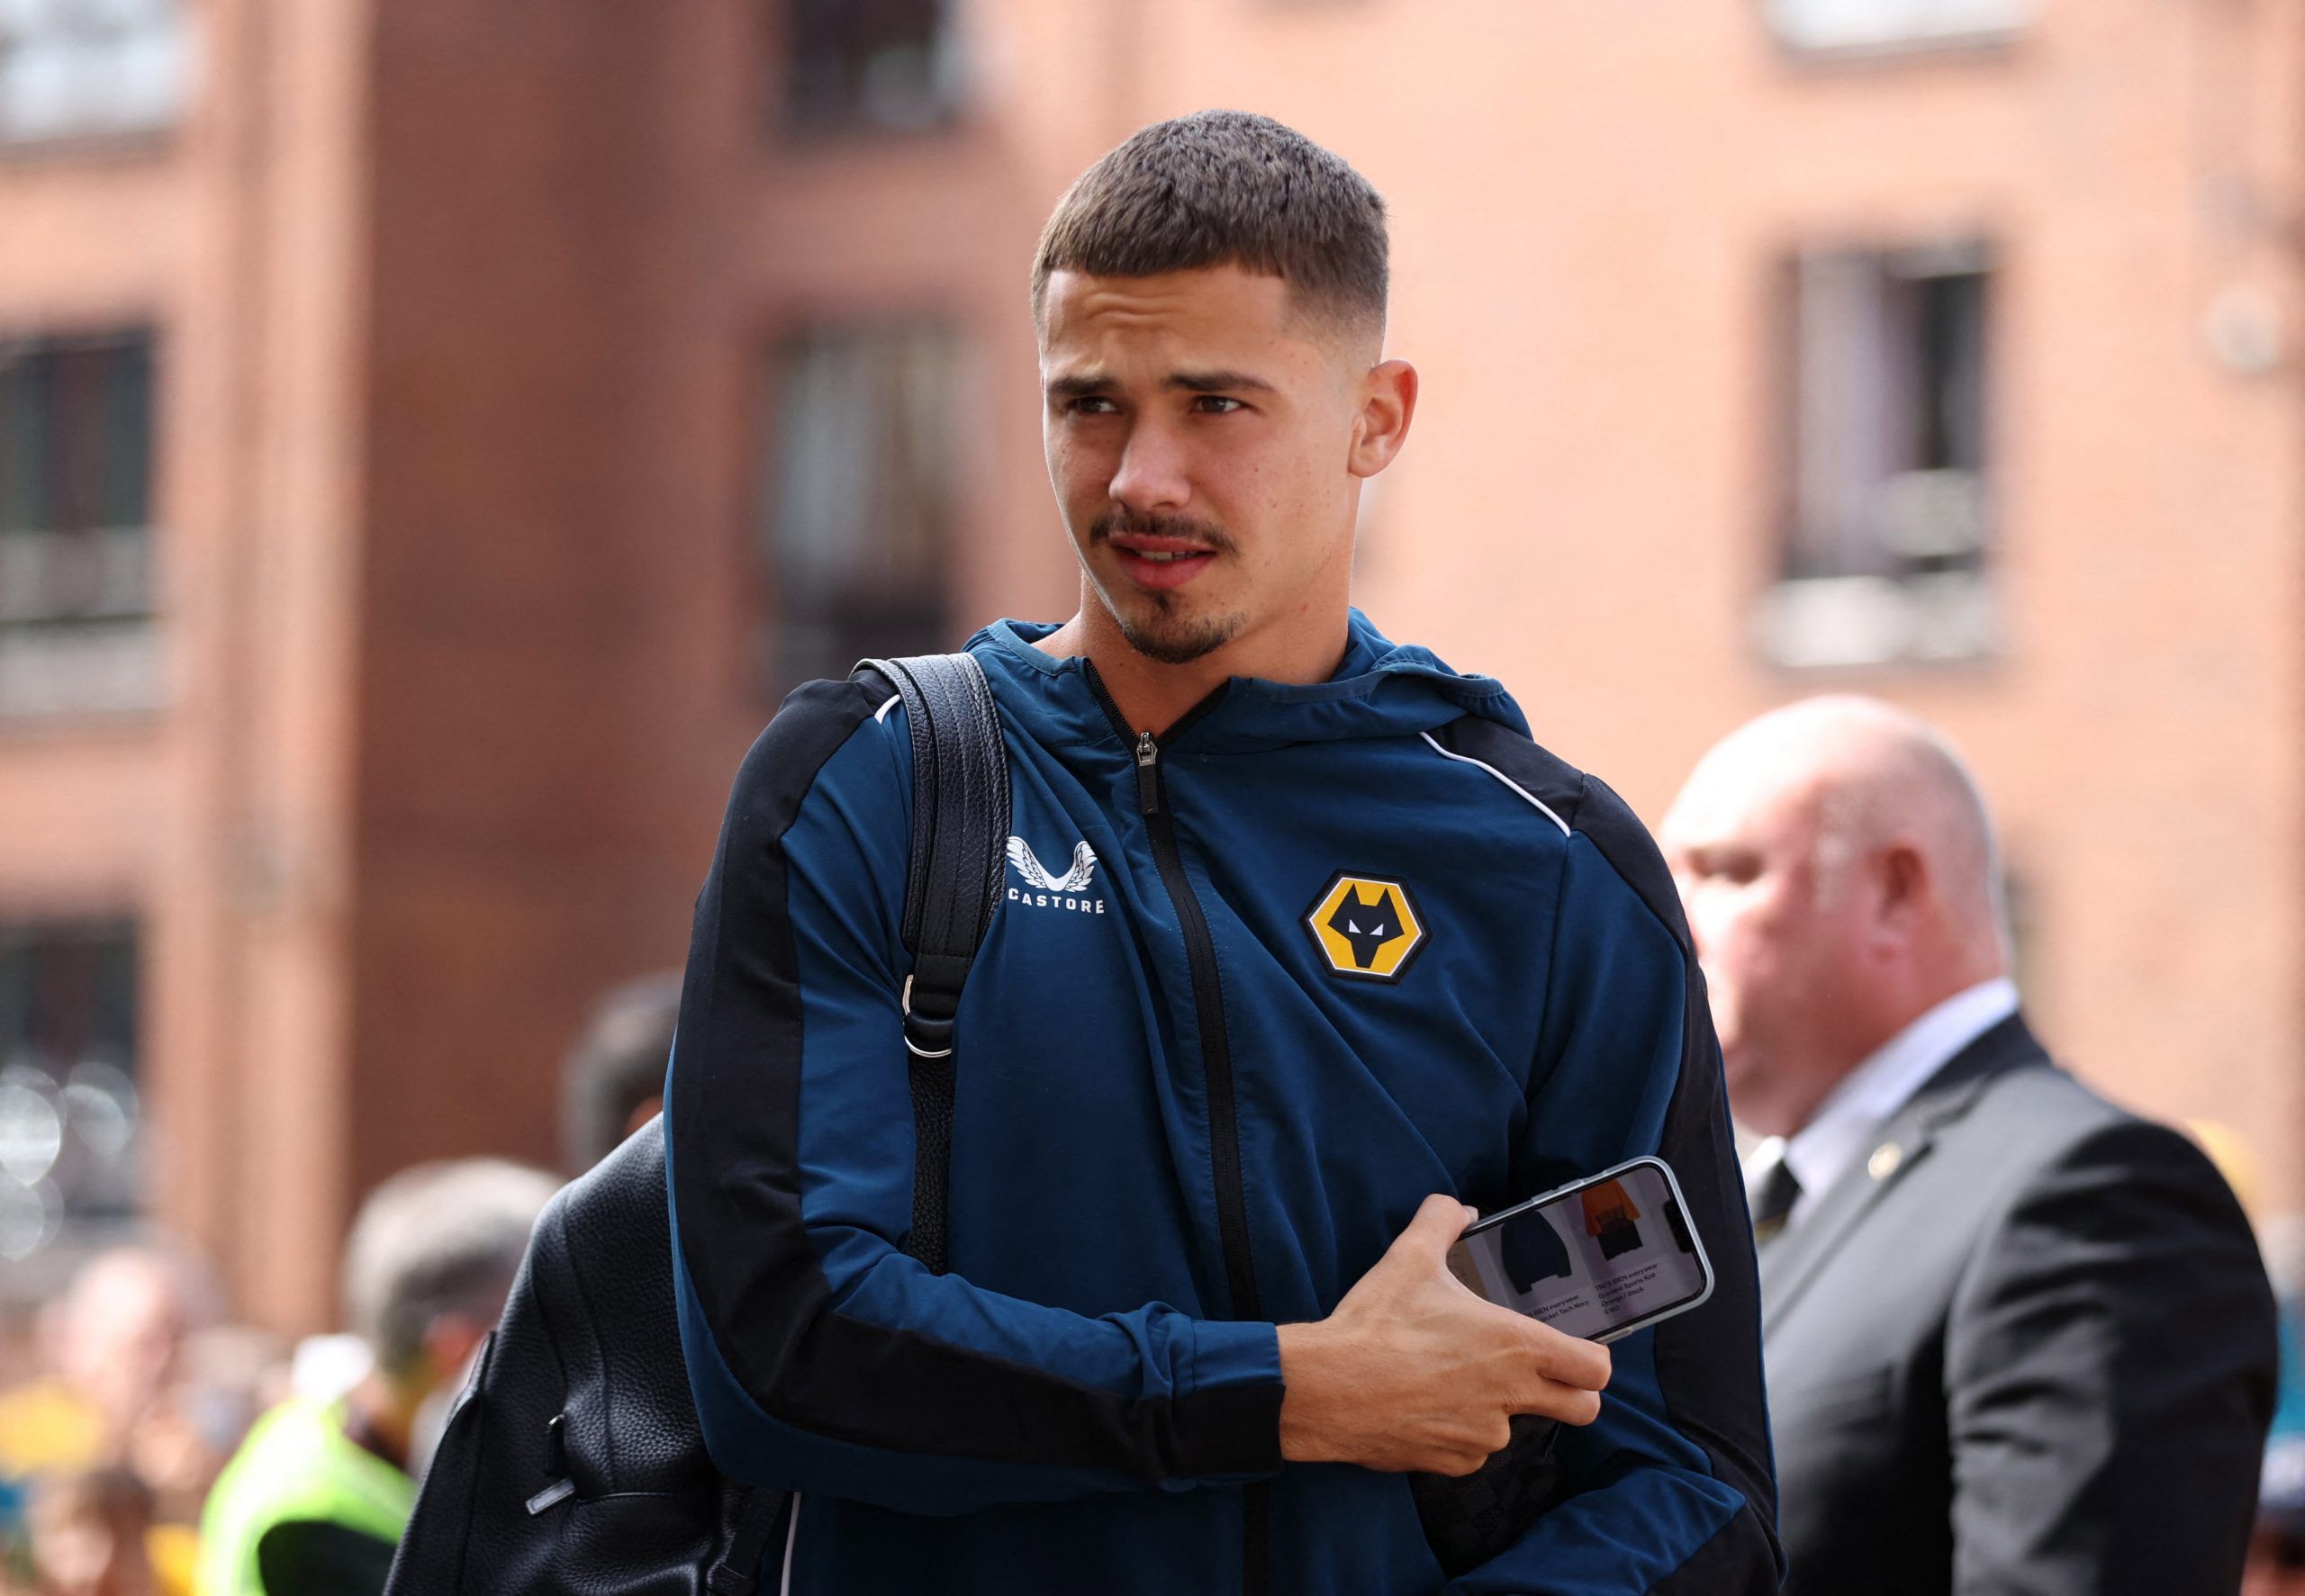 Soccer Football - Premier League - Wolverhampton Wanderers v Newcastle United - Molineux Stadium, Wolverhampton, Britain - August 28, 2022 Wolverhampton Wanderers' Leander Dendoncker arrives for the match Action Images via Reuters/Molly Darlington EDITORIAL USE ONLY. No use with unauthorized audio, video, data, fixture lists, club/league logos or 'live' services. Online in-match use limited to 75 images, no video emulation. No use in betting, games or single club /league/player publications.  Pl